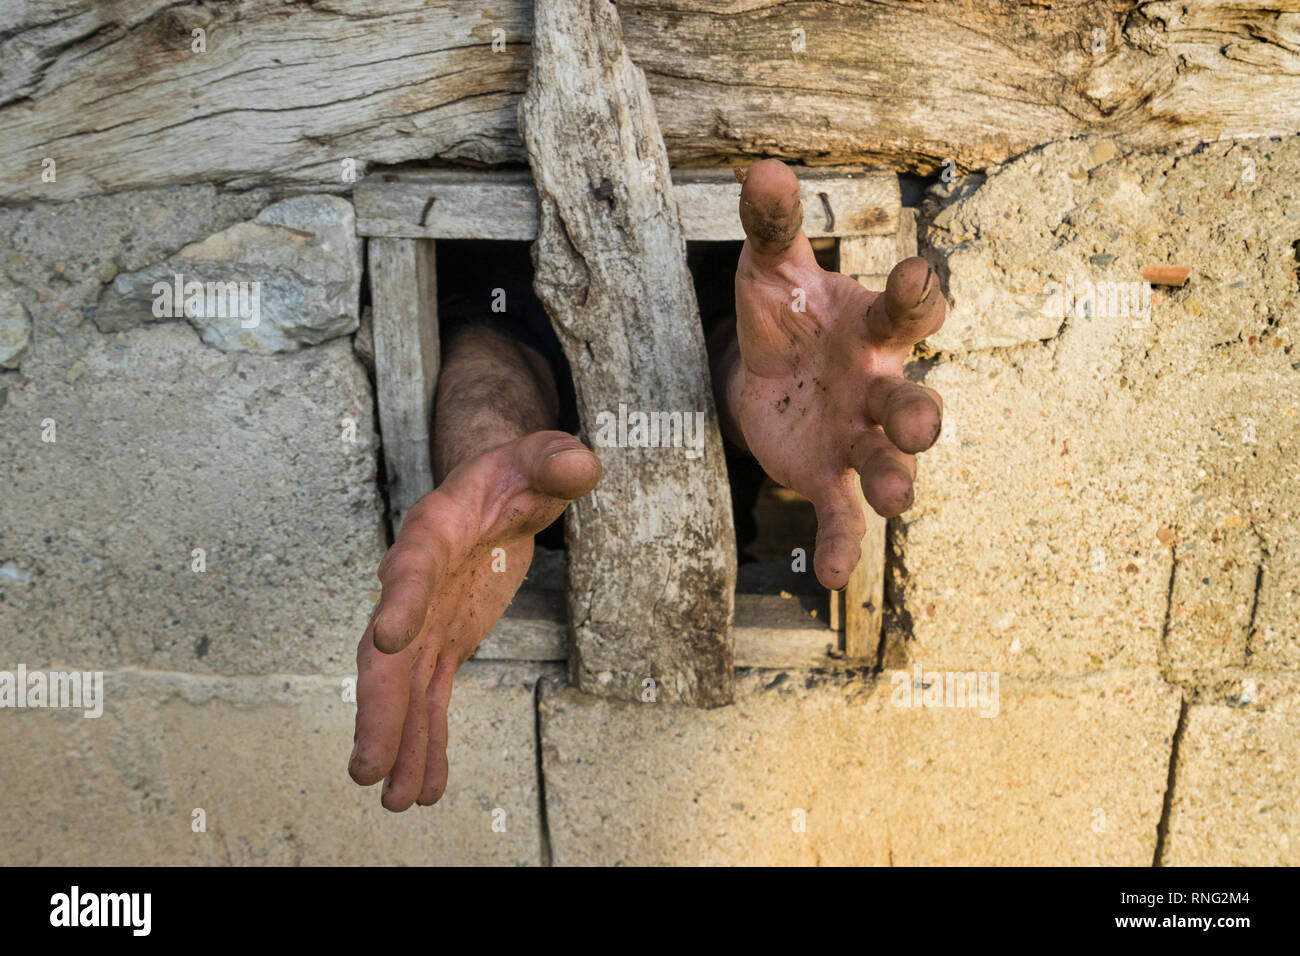 Hands reaching out of a small window from a mud and stone made house in the Balkan Mountains region of Eastern Serbia. Stock Photo